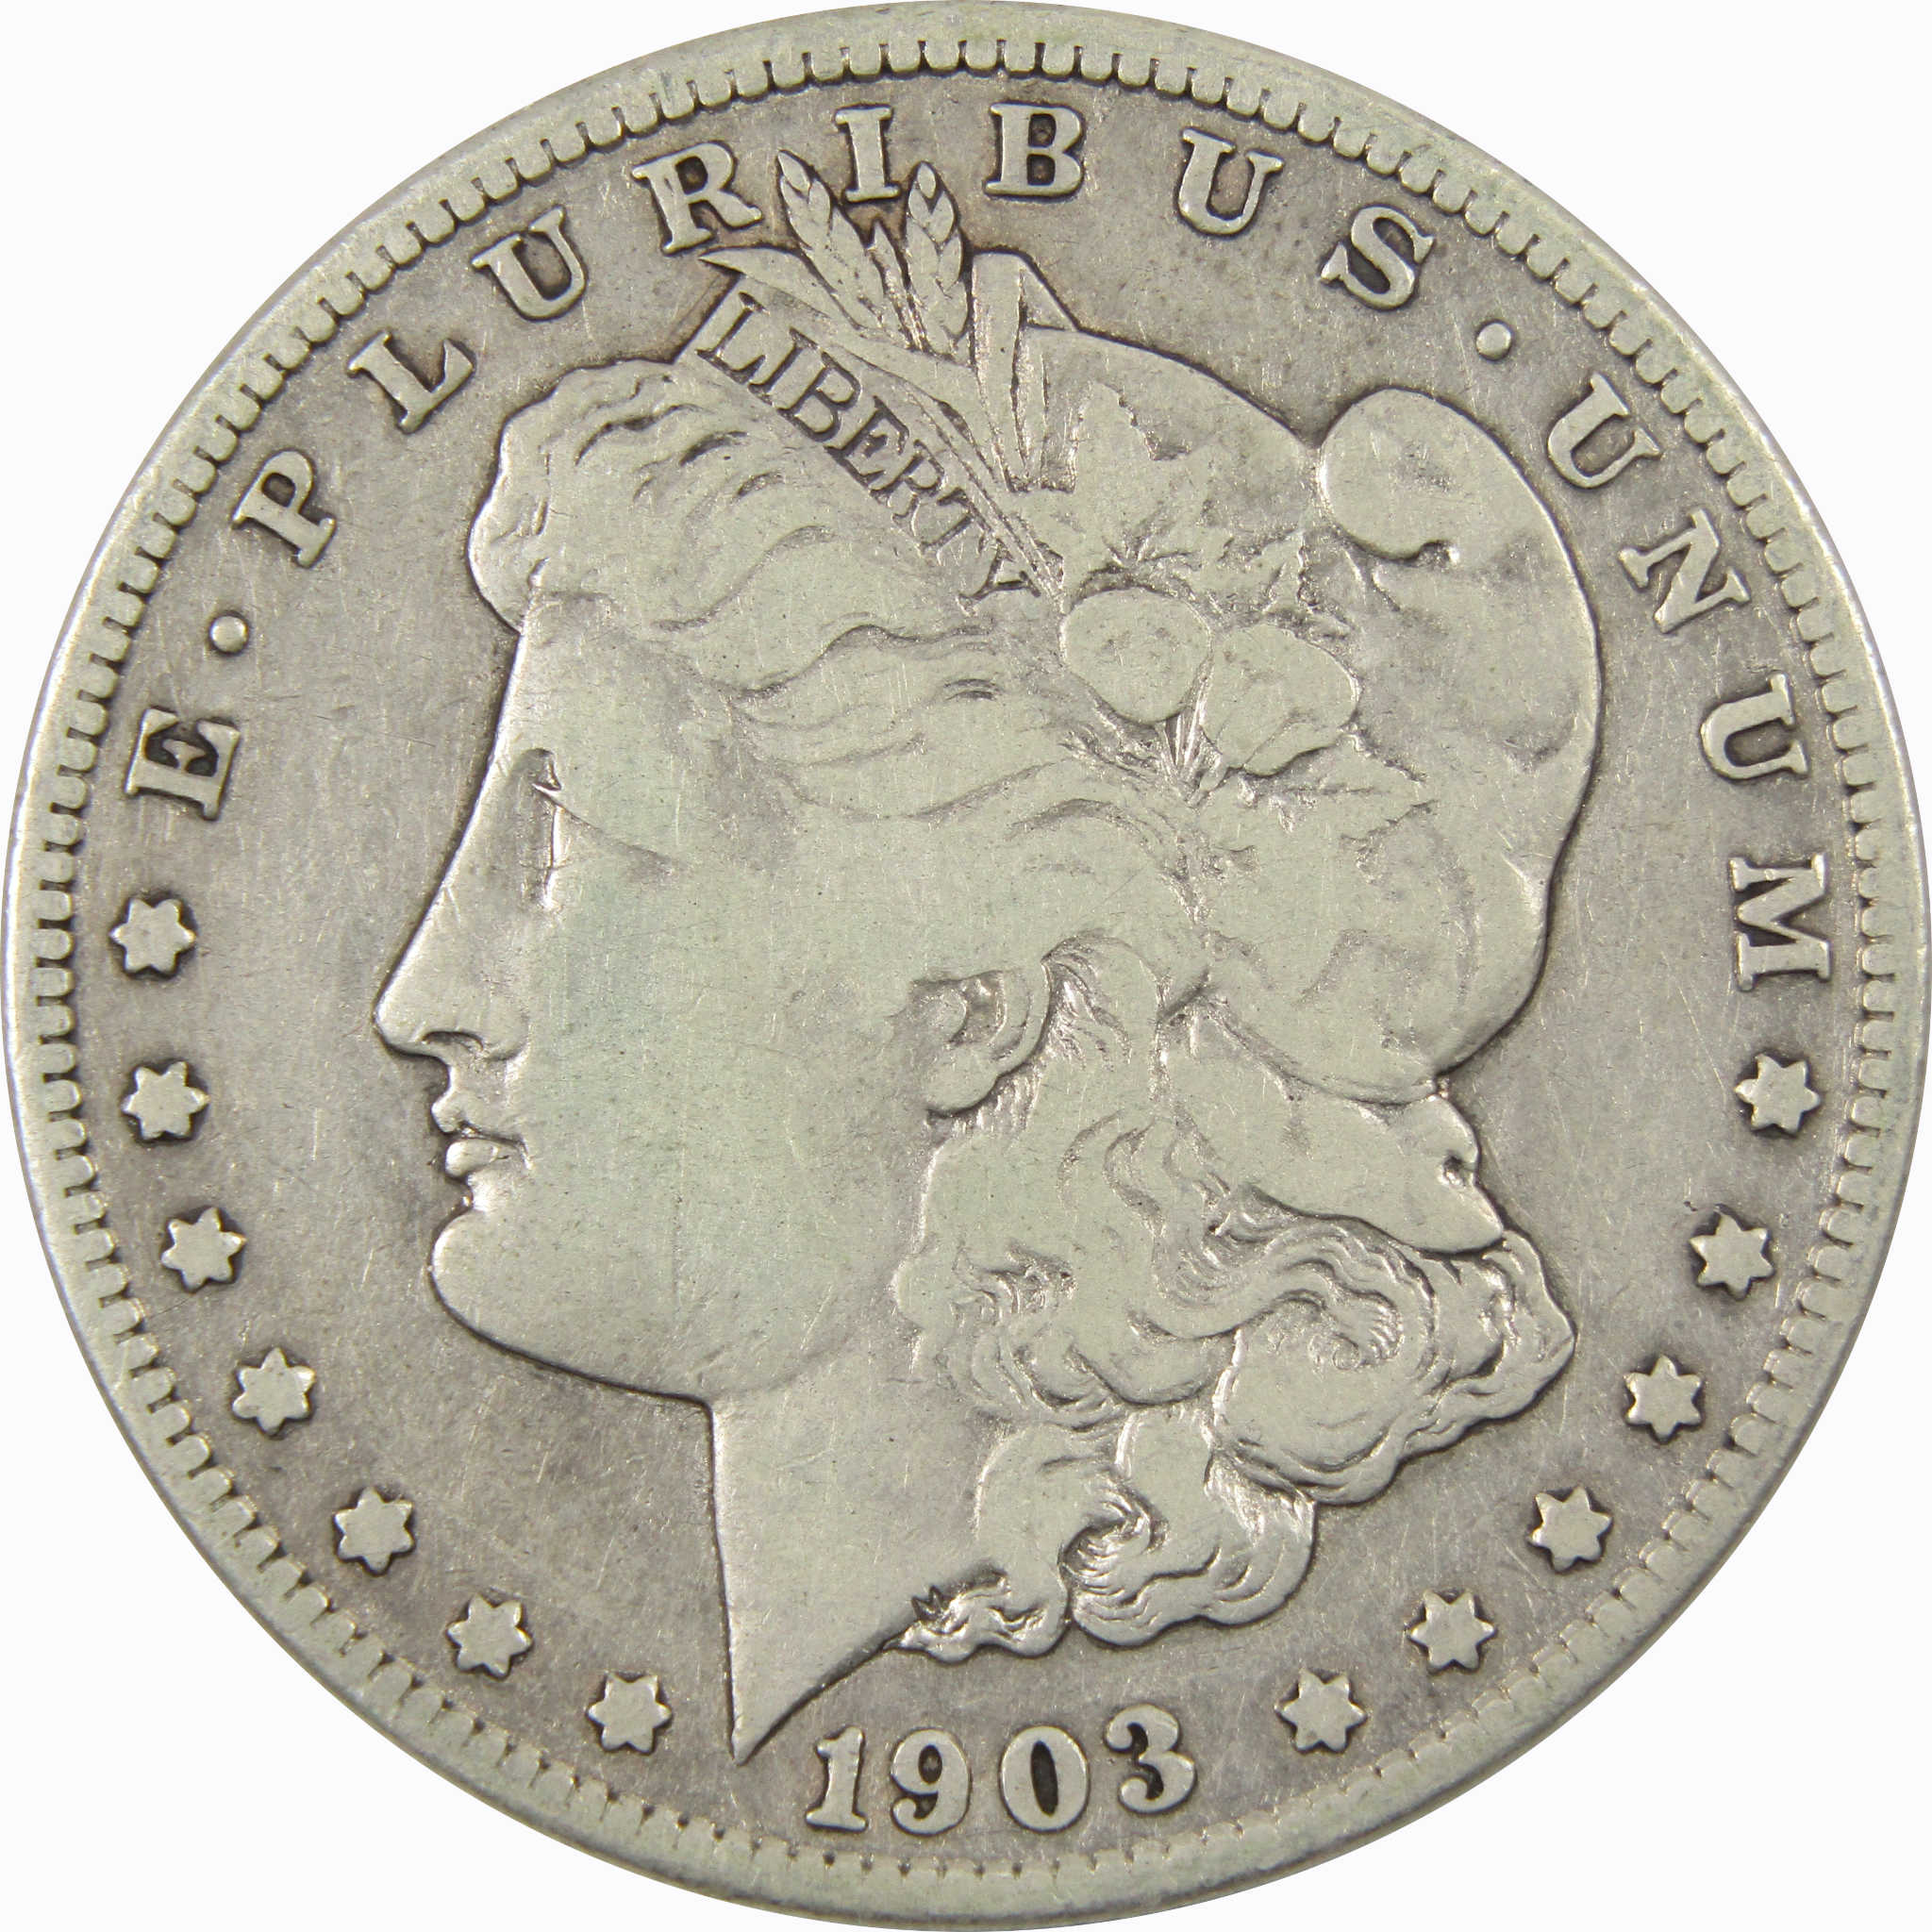 1903 S Morgan Dollar VG Very Good Details 90% Silver $1 Coin SKU:I9415 - Morgan coin - Morgan silver dollar - Morgan silver dollar for sale - Profile Coins &amp; Collectibles